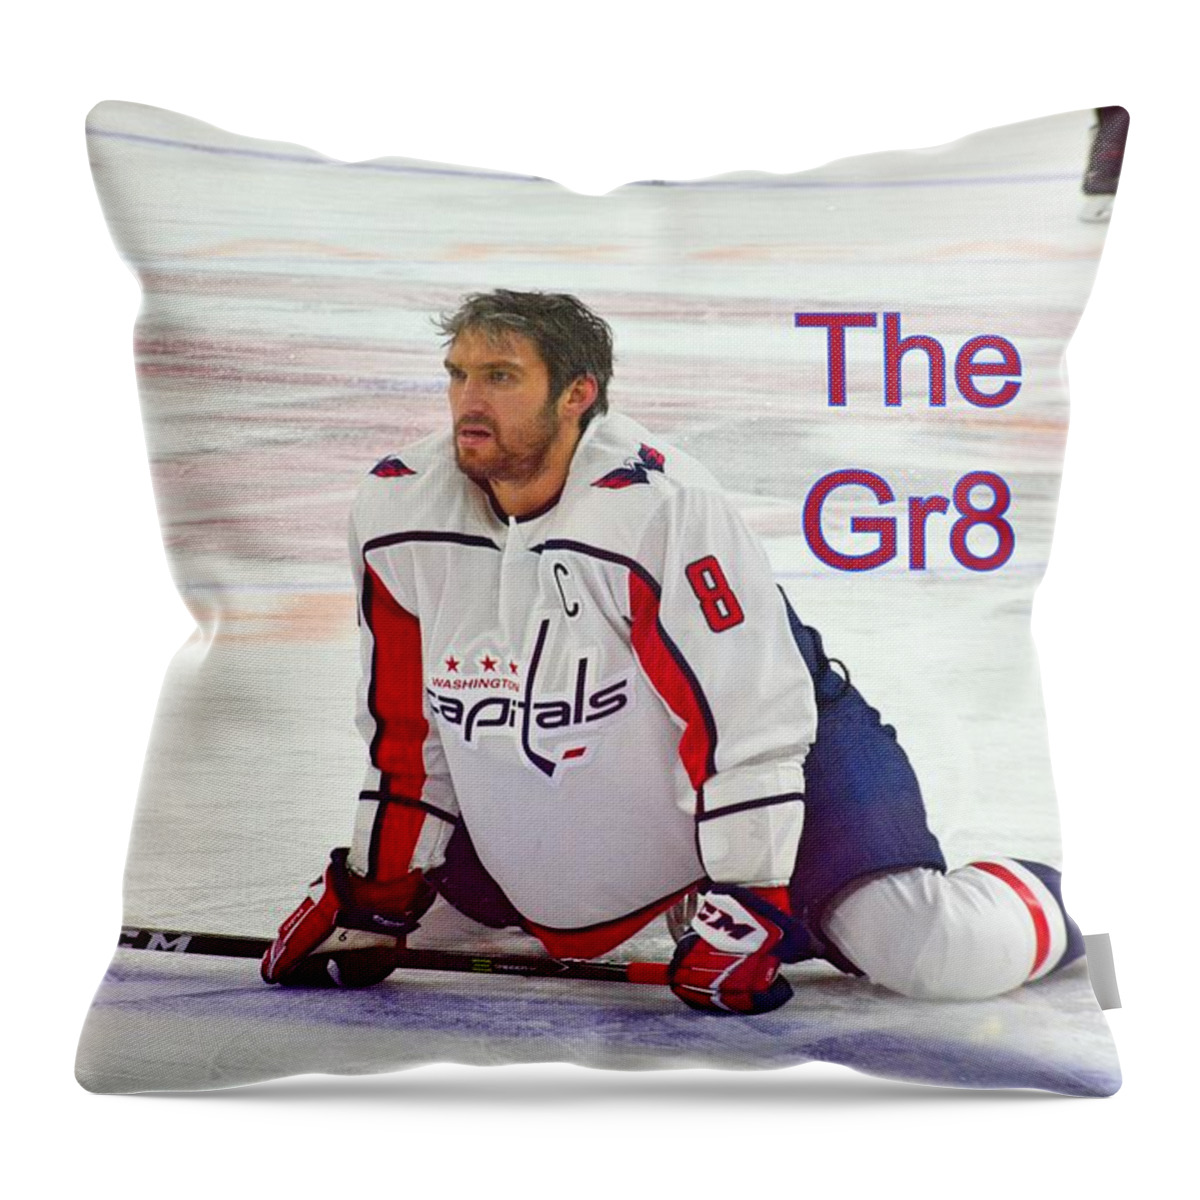 The Gr8 Throw Pillow featuring the photograph The GR8 by Lisa Wooten